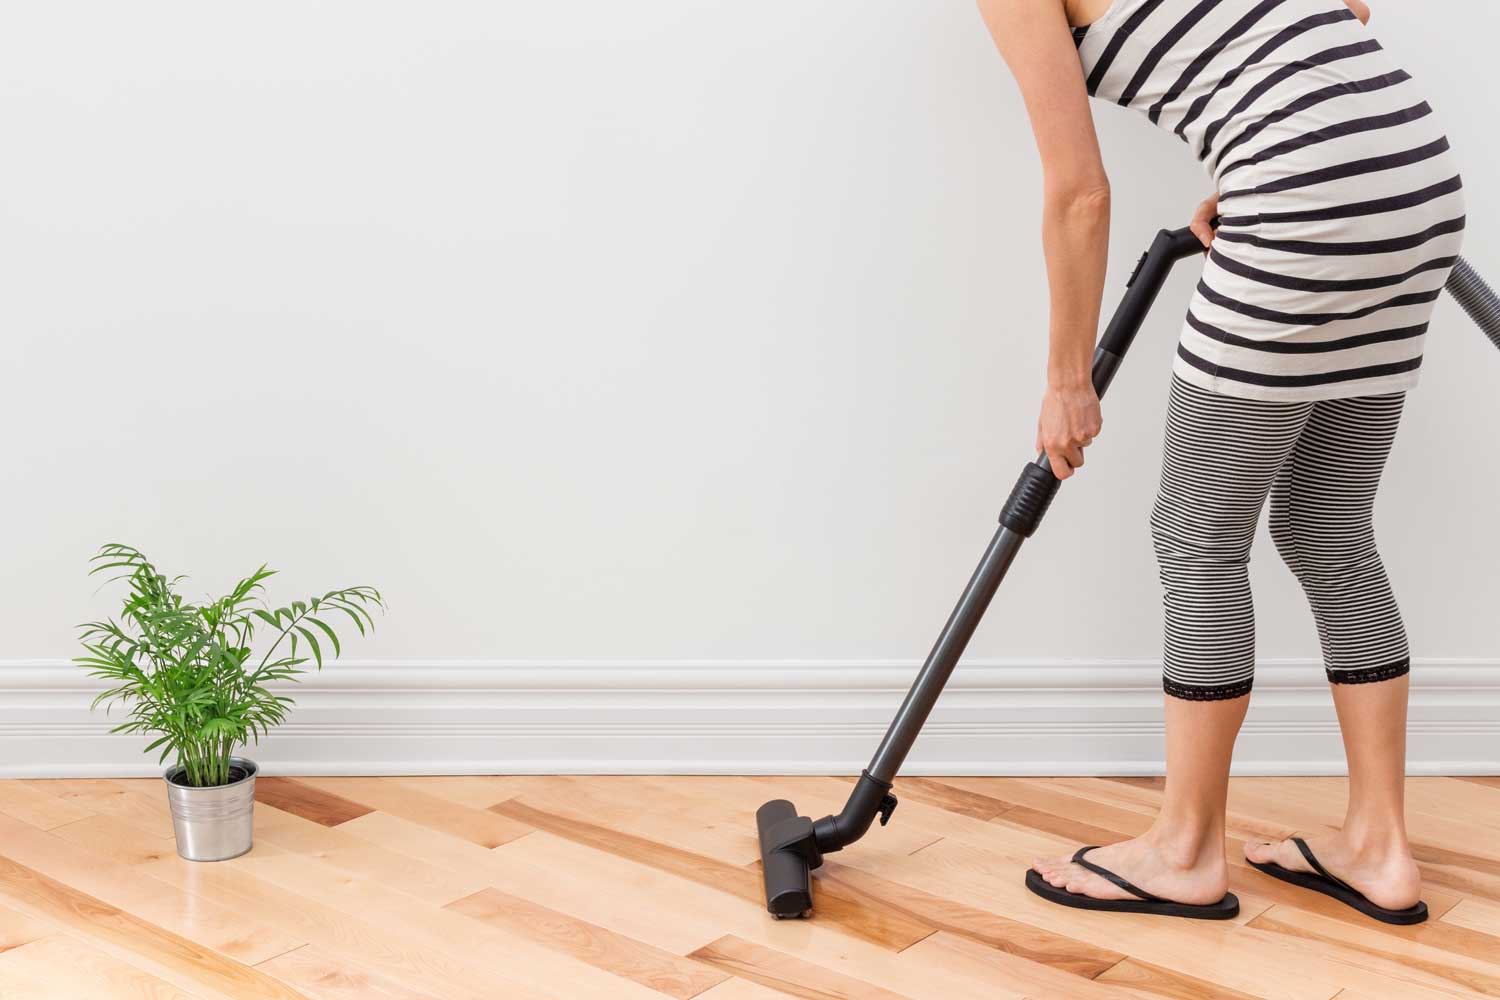 Regulary vacuum or sweep floors to remove dirt and keep your home floors looking amazing - tips from Footprints Floors in Melbourne / Palm Bay.